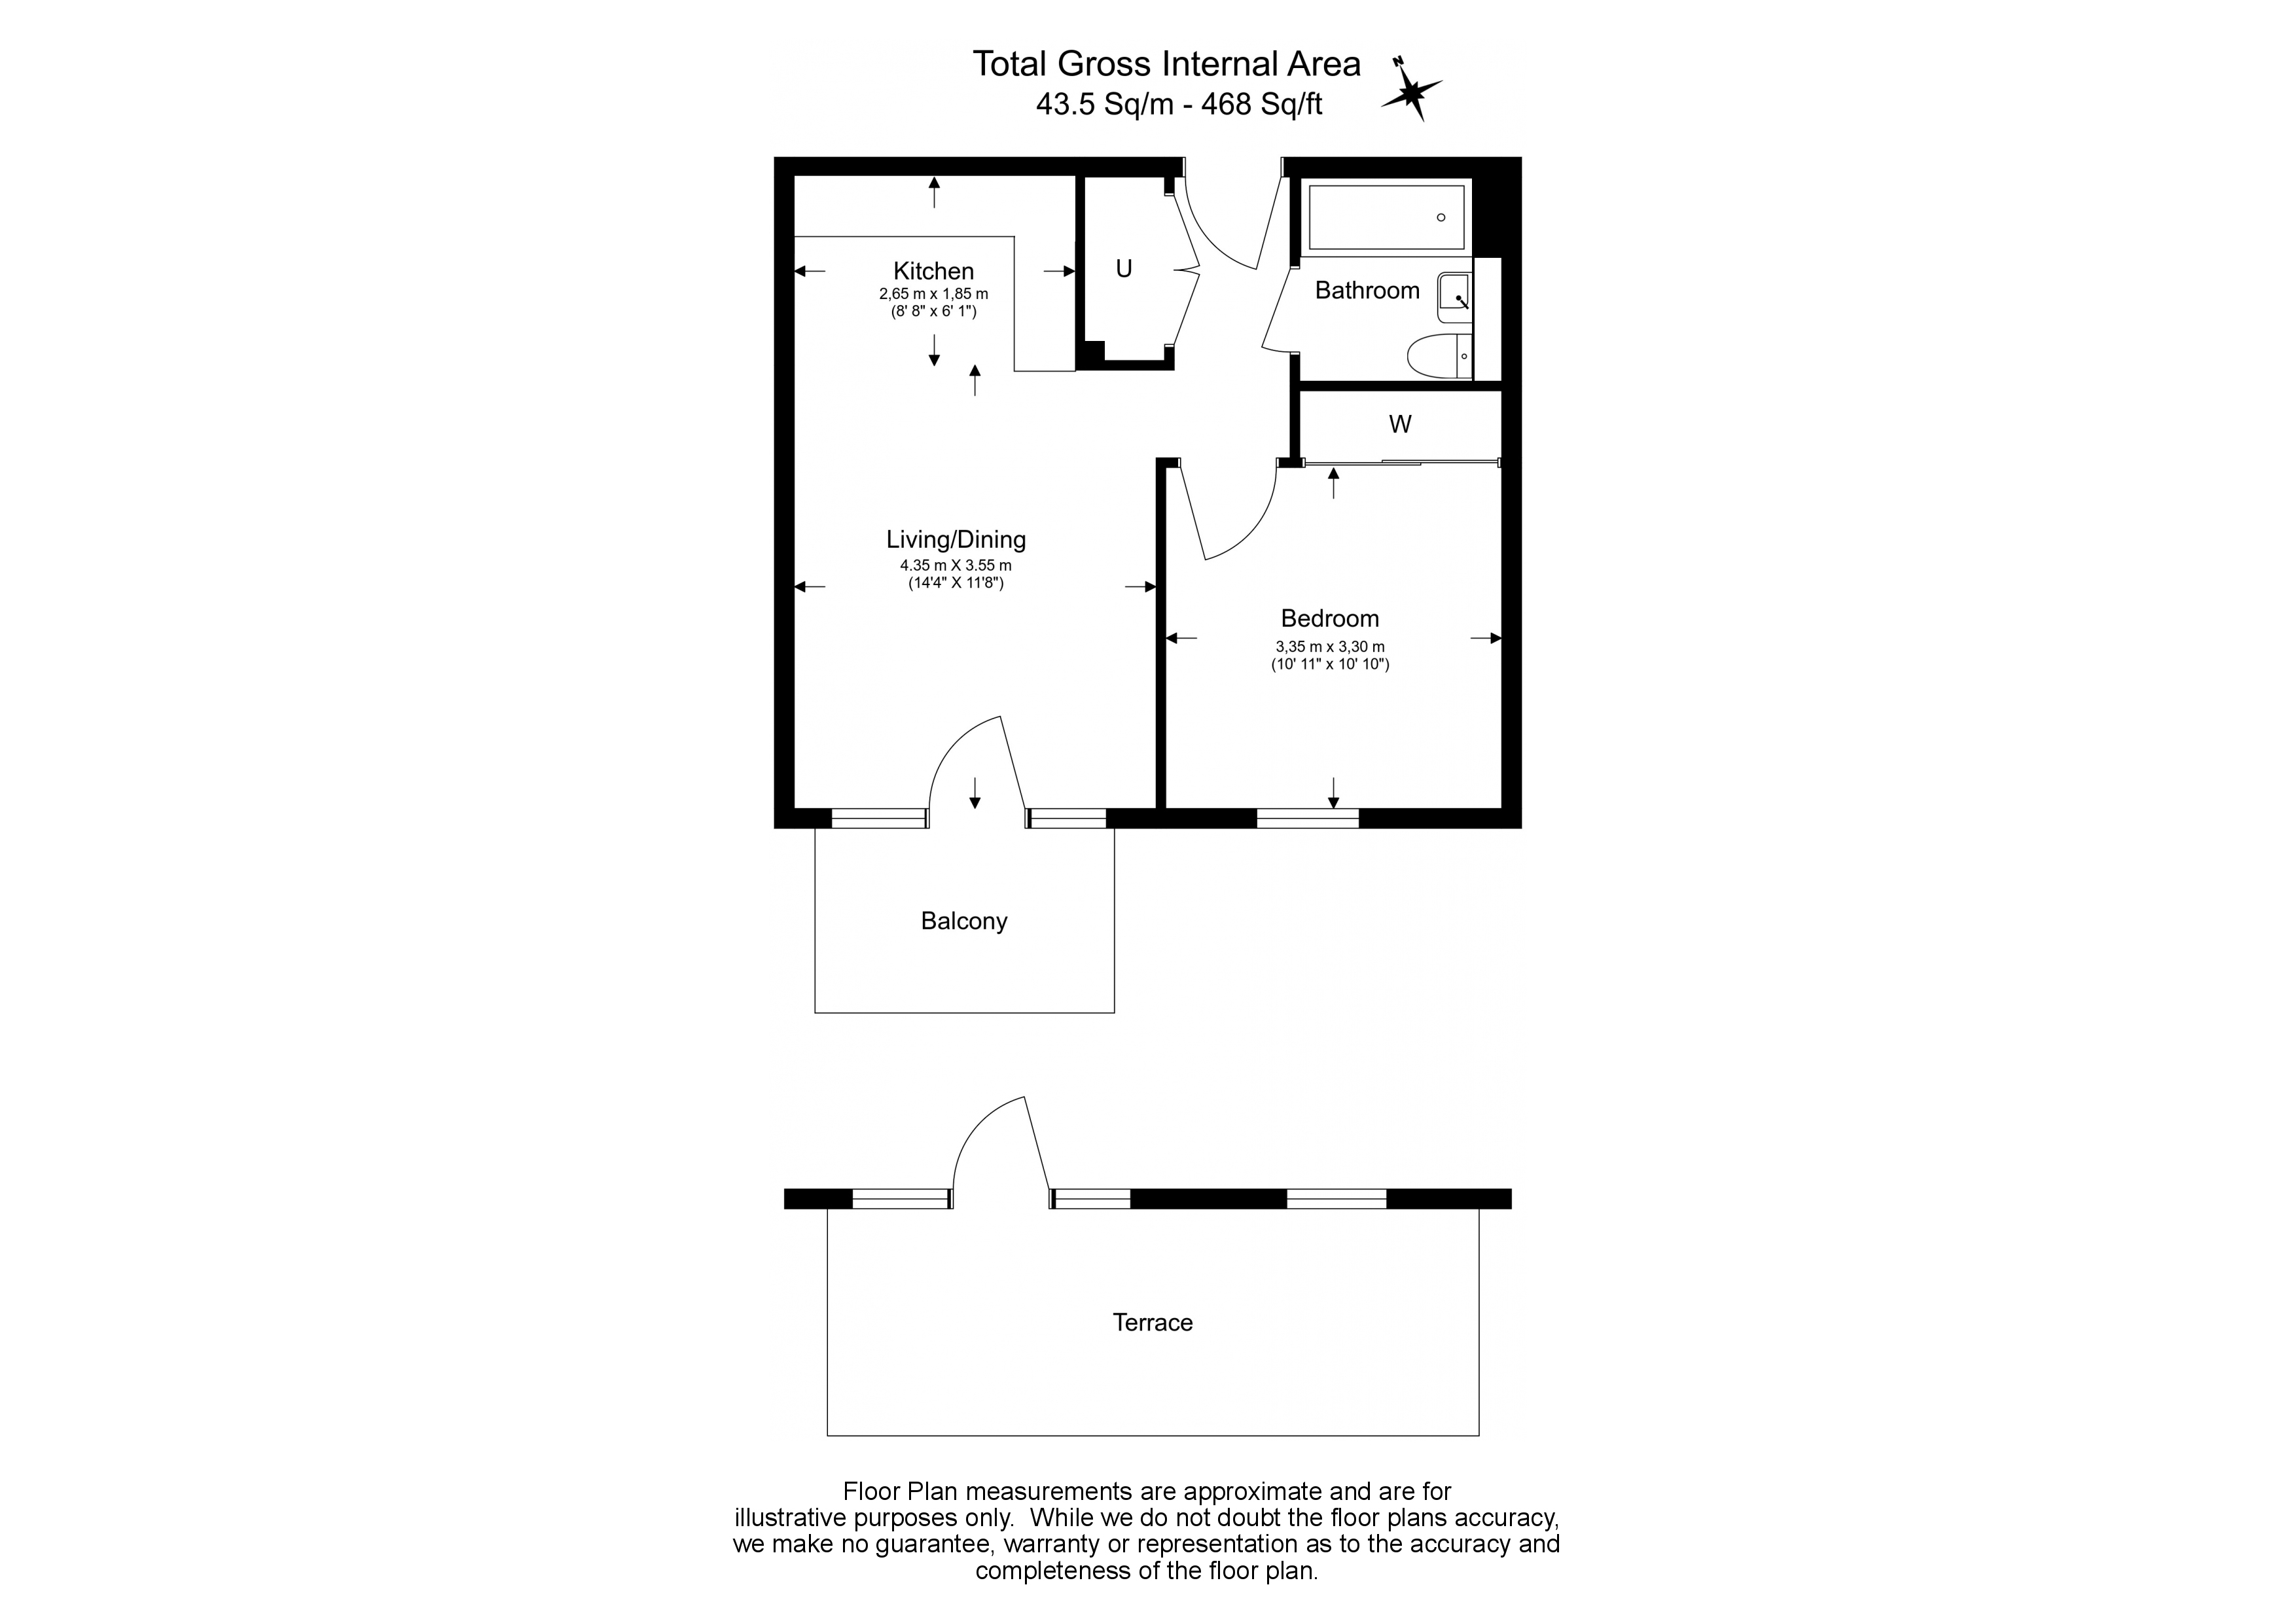 1 bedroom apartments/flats to sale in Green Park Village, Reading-Floorplan